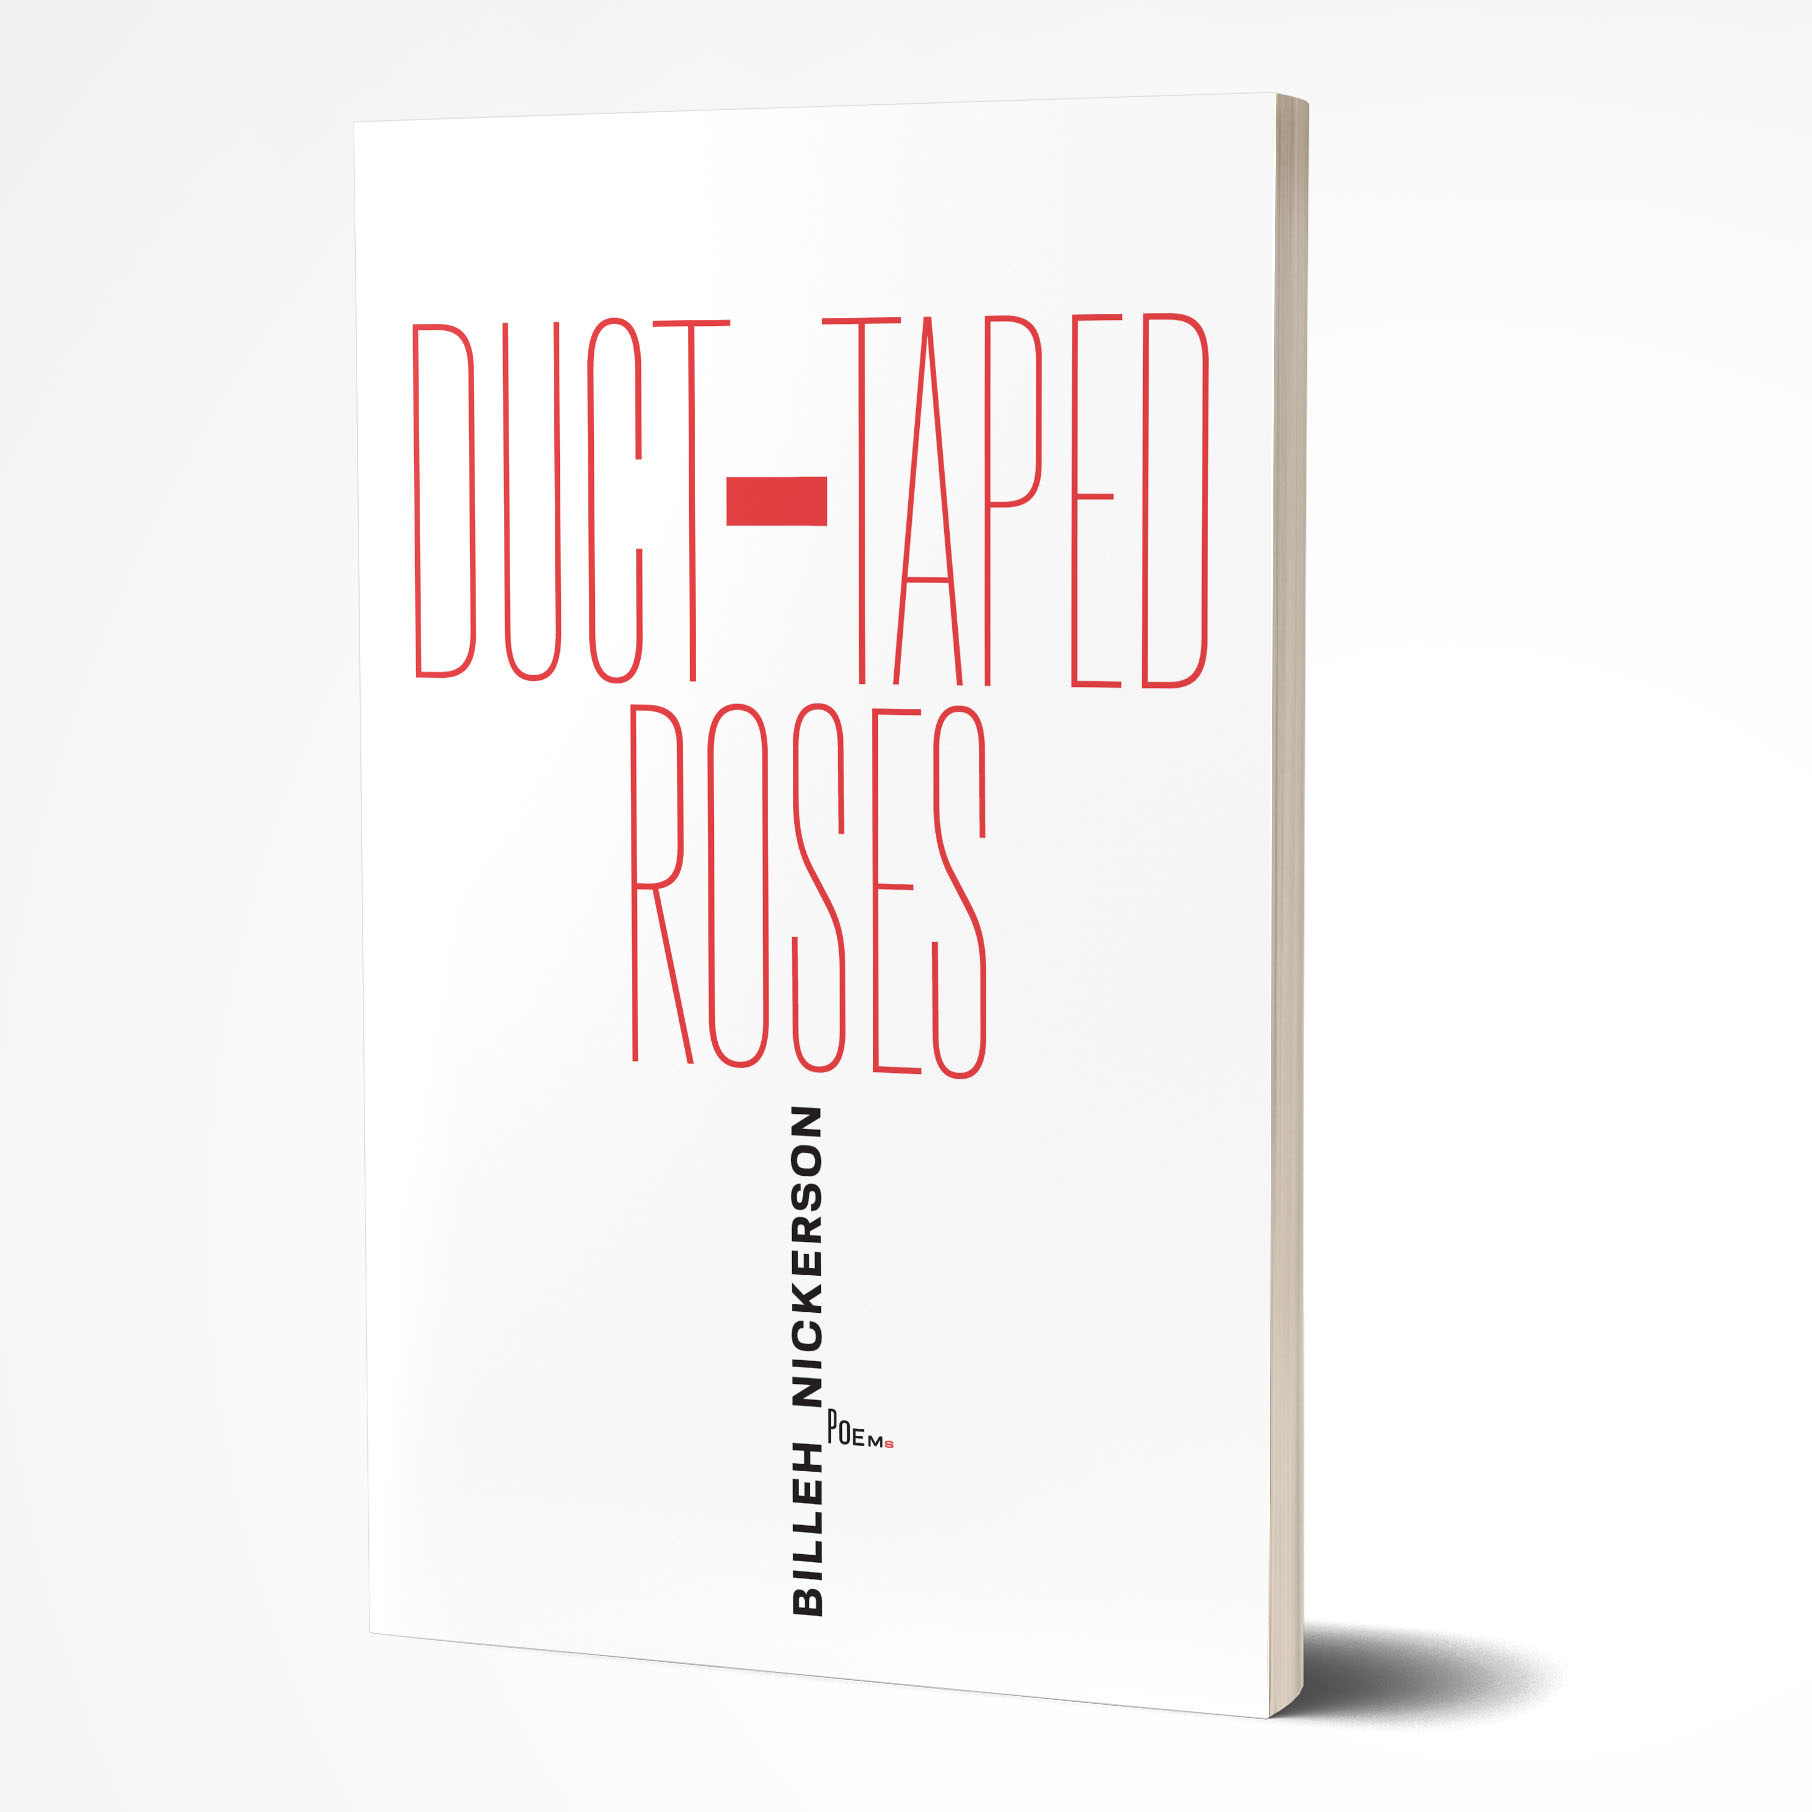 Duct-Taped_Roses_D1_V5